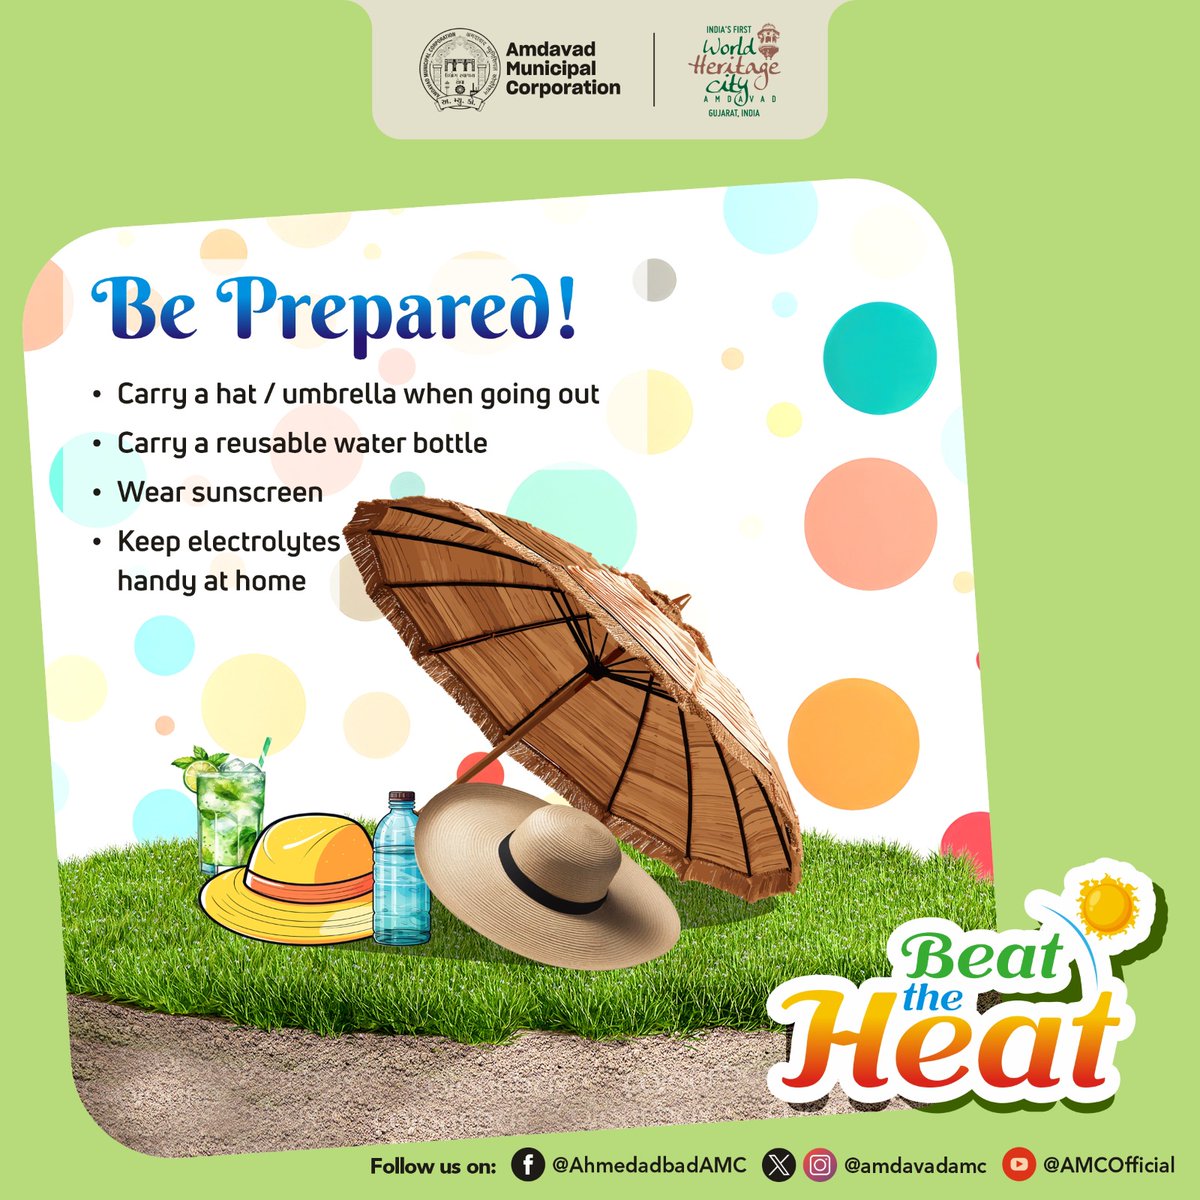 Preparing well in advance can help tackle the uncomfortable summer days a breeze. Here are some simple tips to keep in mind before we step out in the sun.

#amc #amcforpeople #beattheheatwithamc #stayhydrated #ahmedabad #municipalcorporation